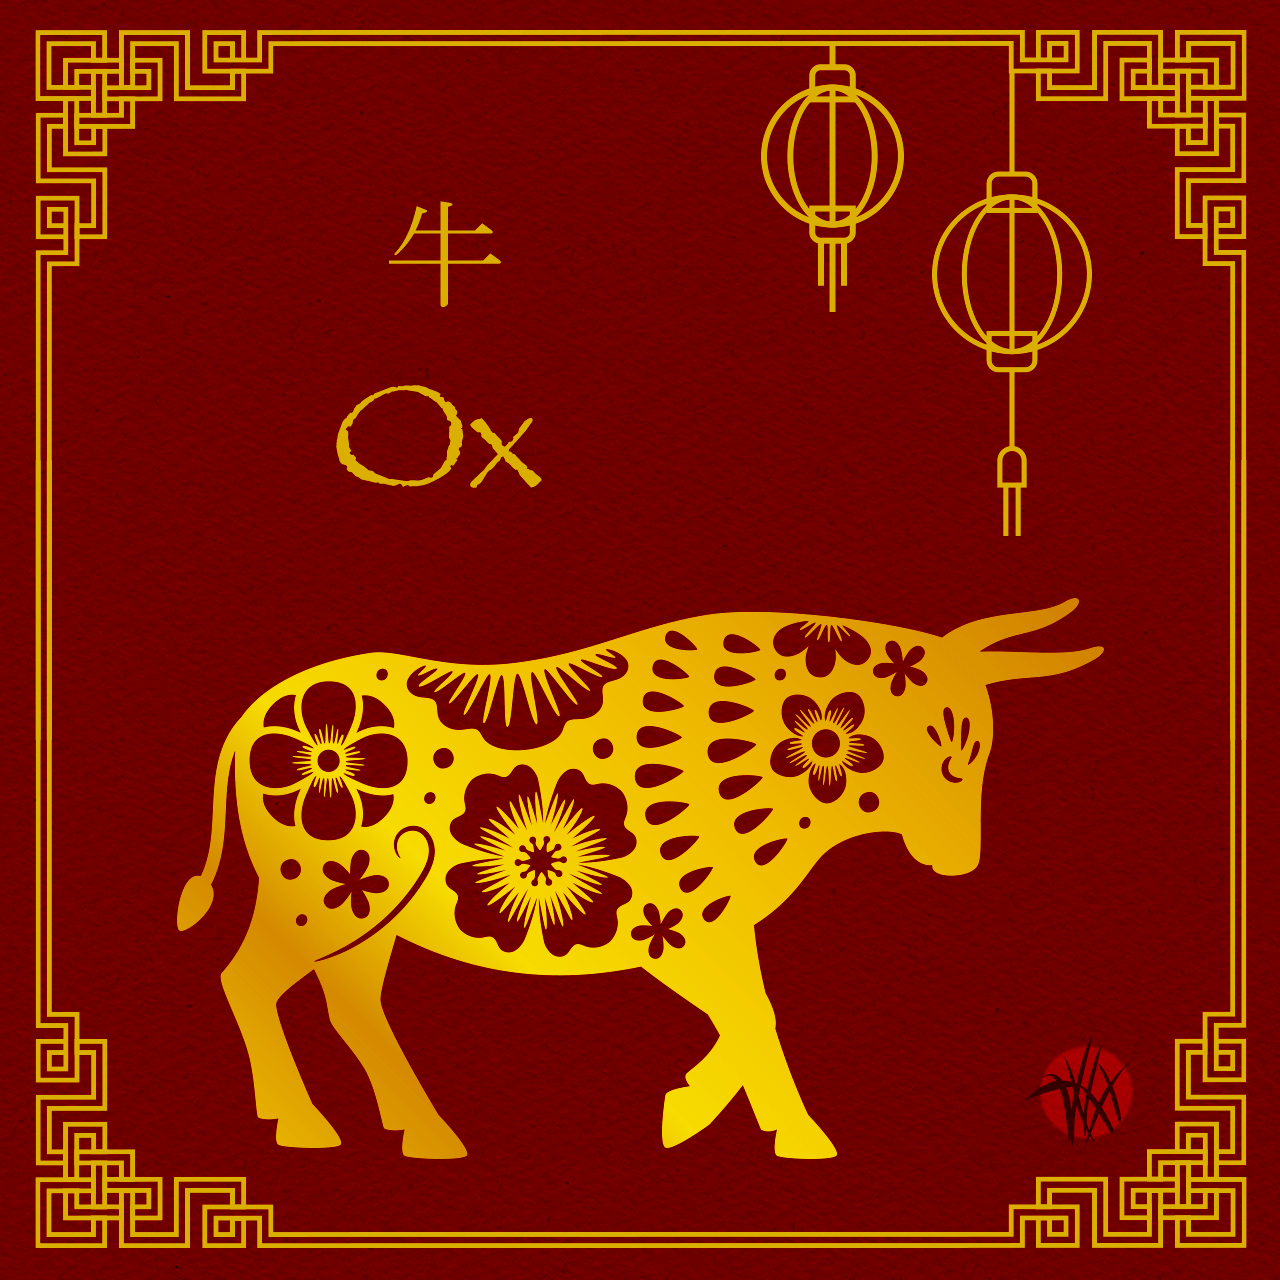 year of the ox